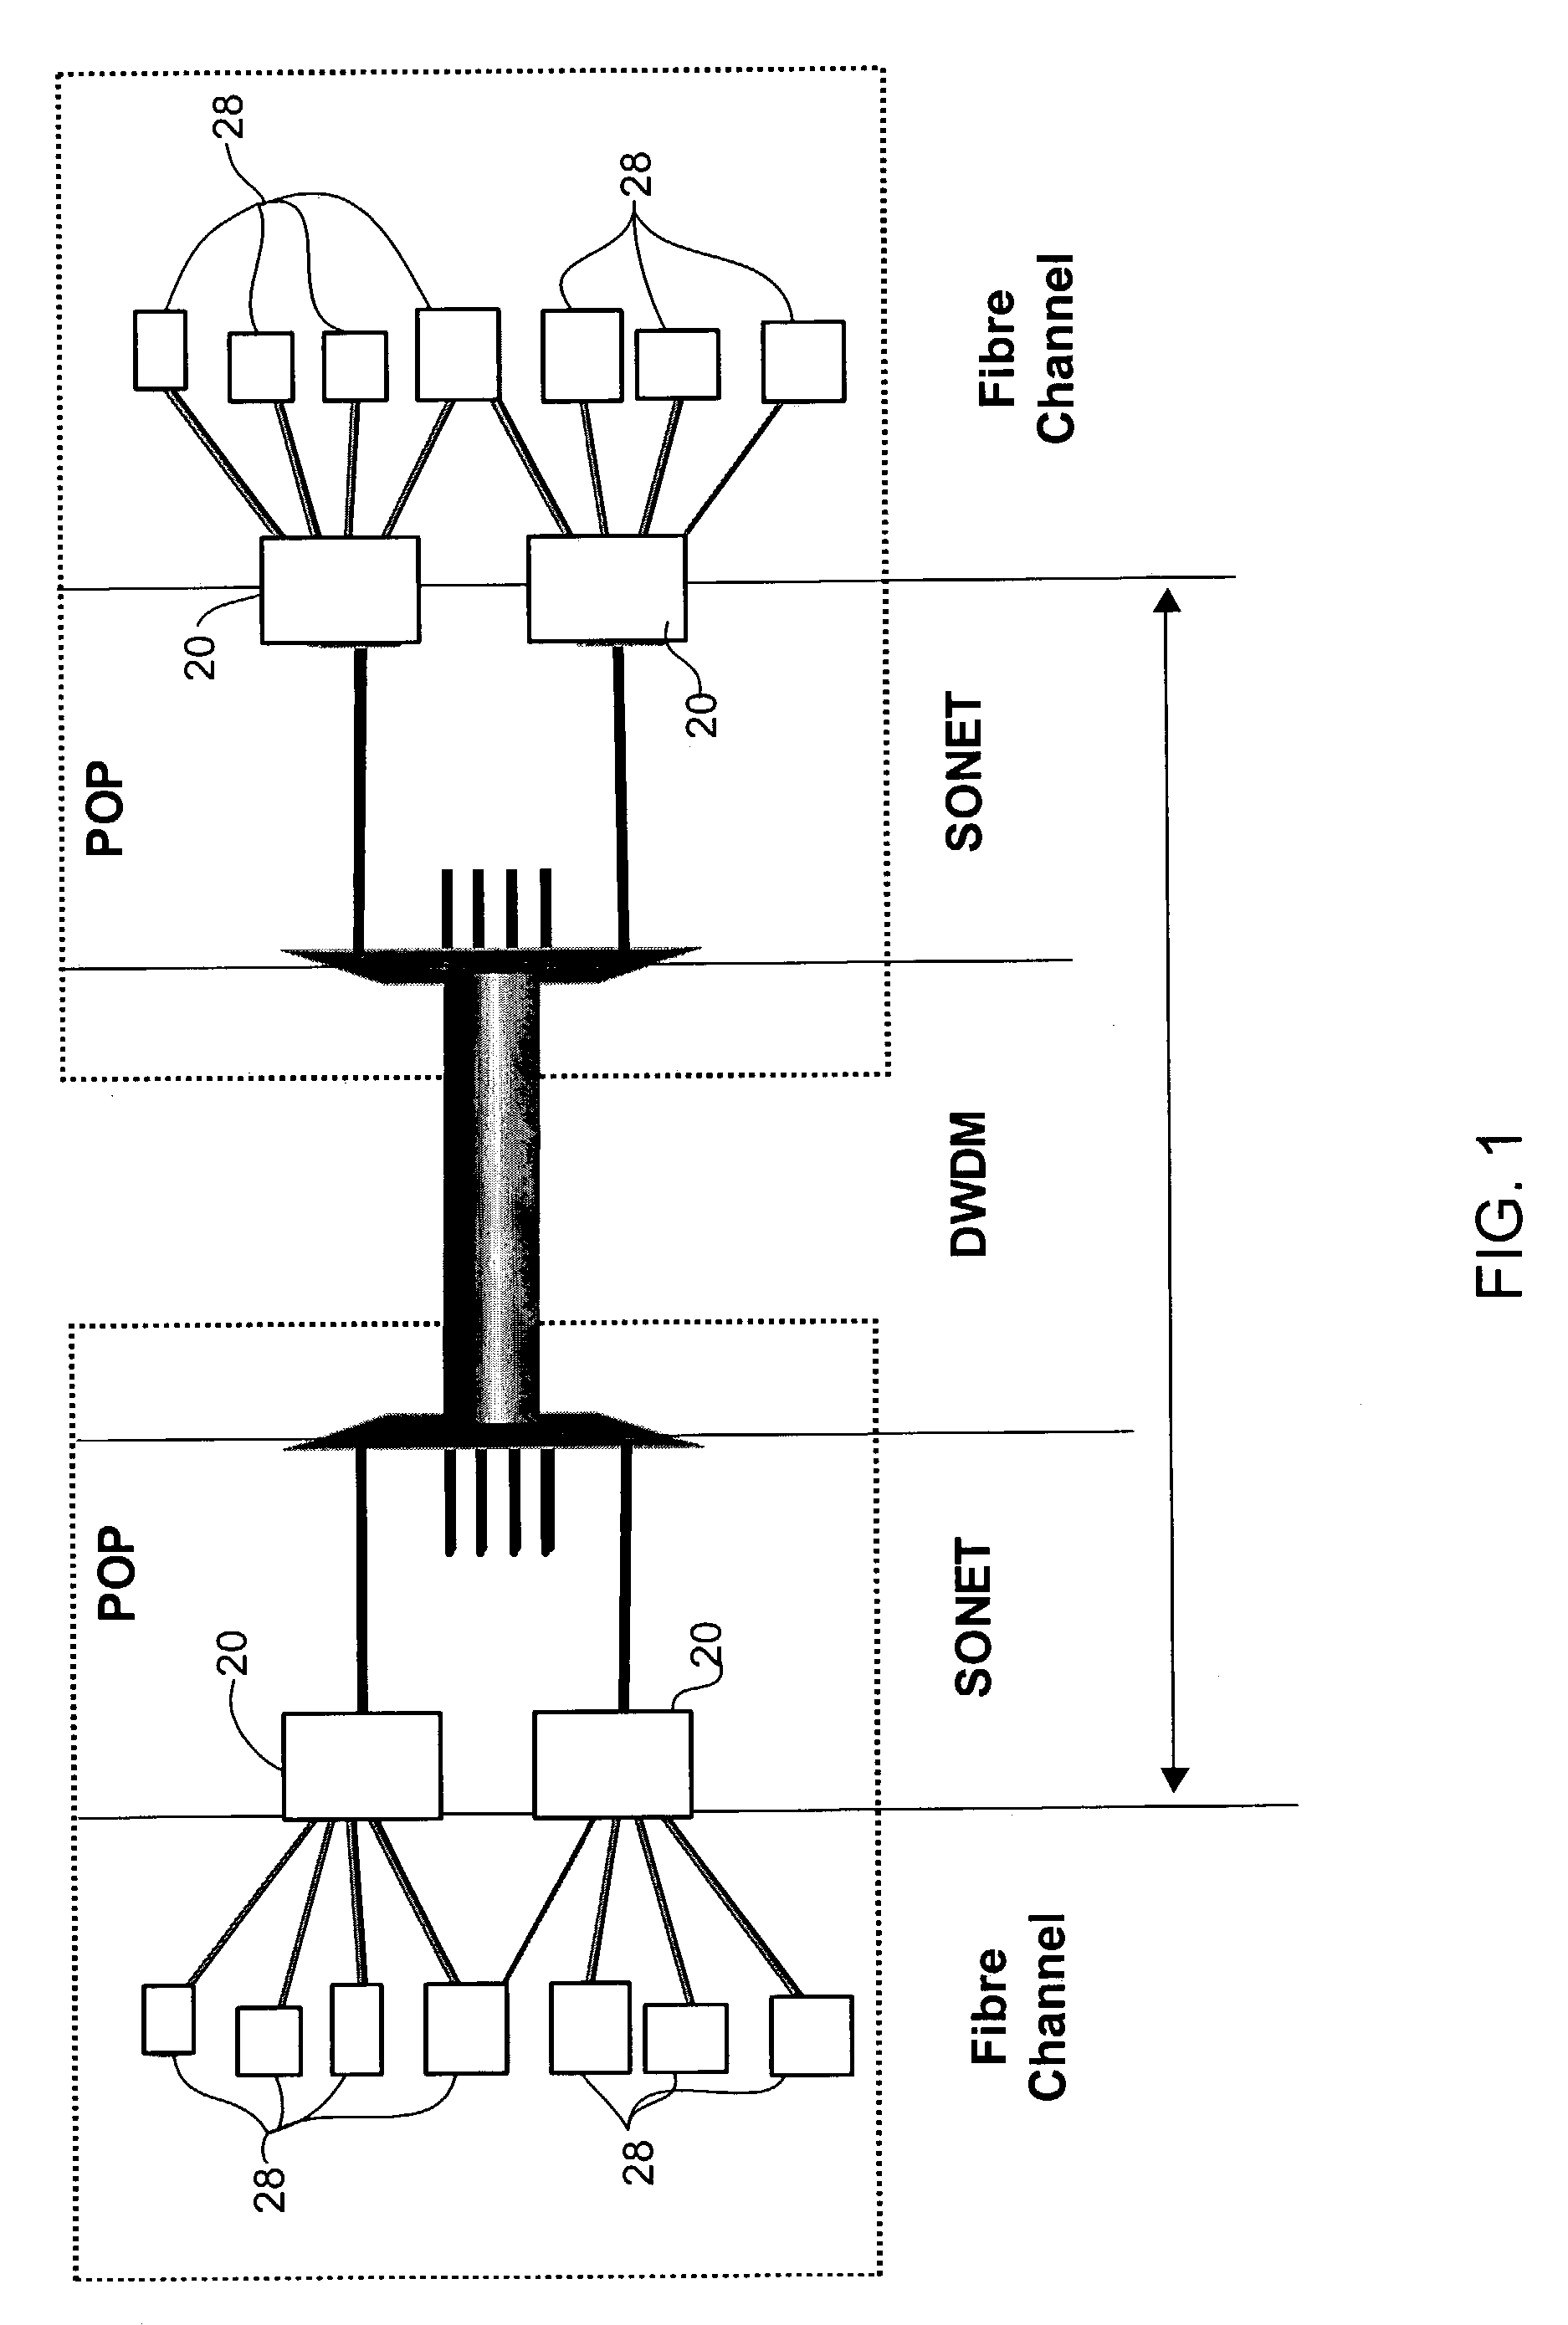 Method and system for emulating a Fiber Channel link over a SONET/SDH path